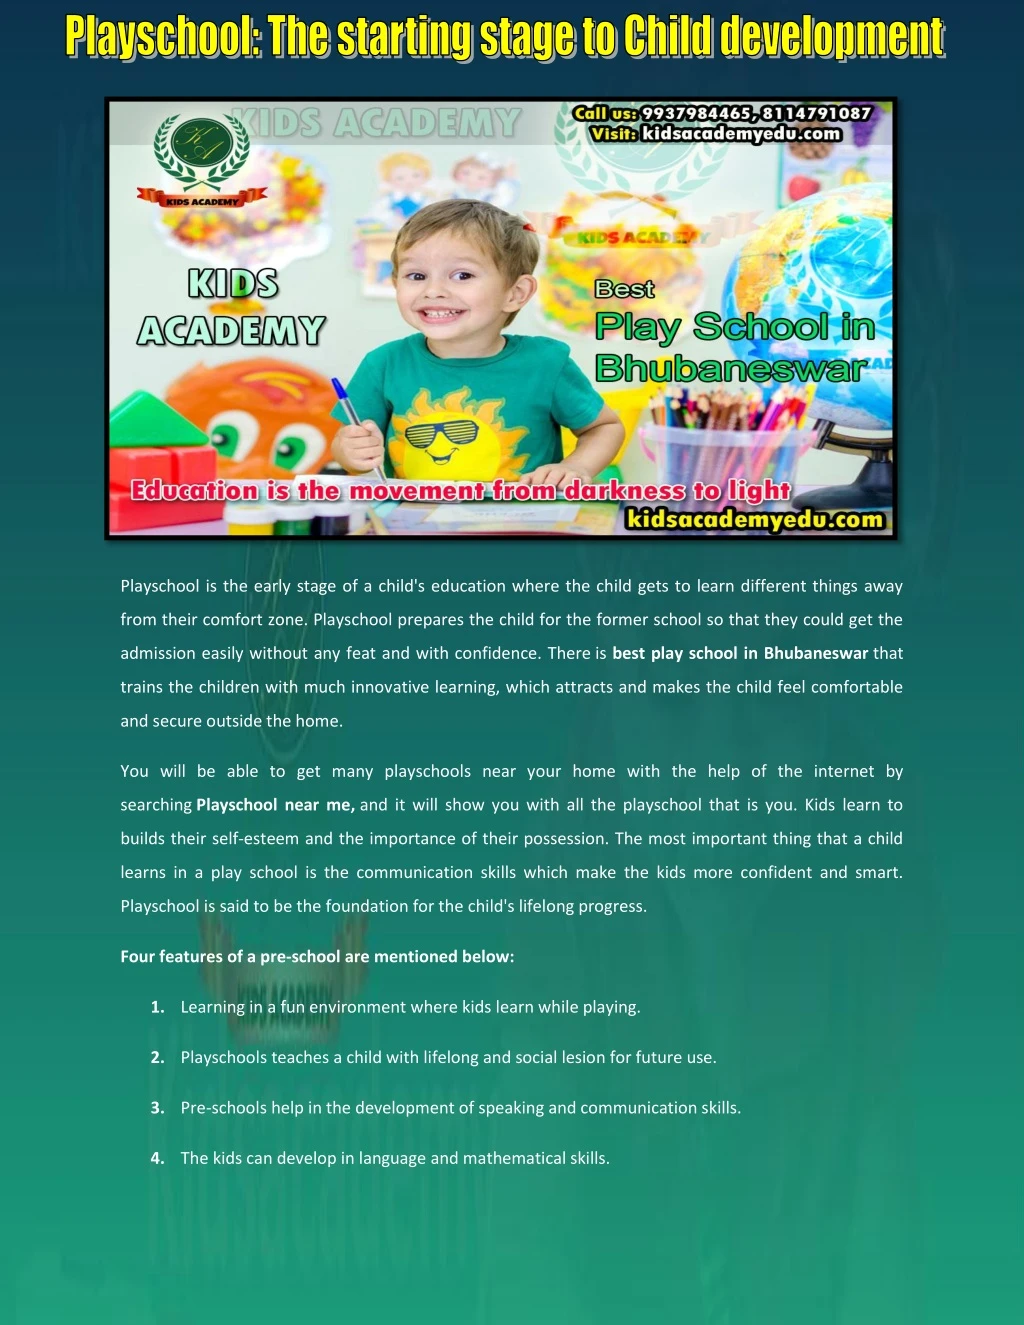 playschool is the early stage of a child